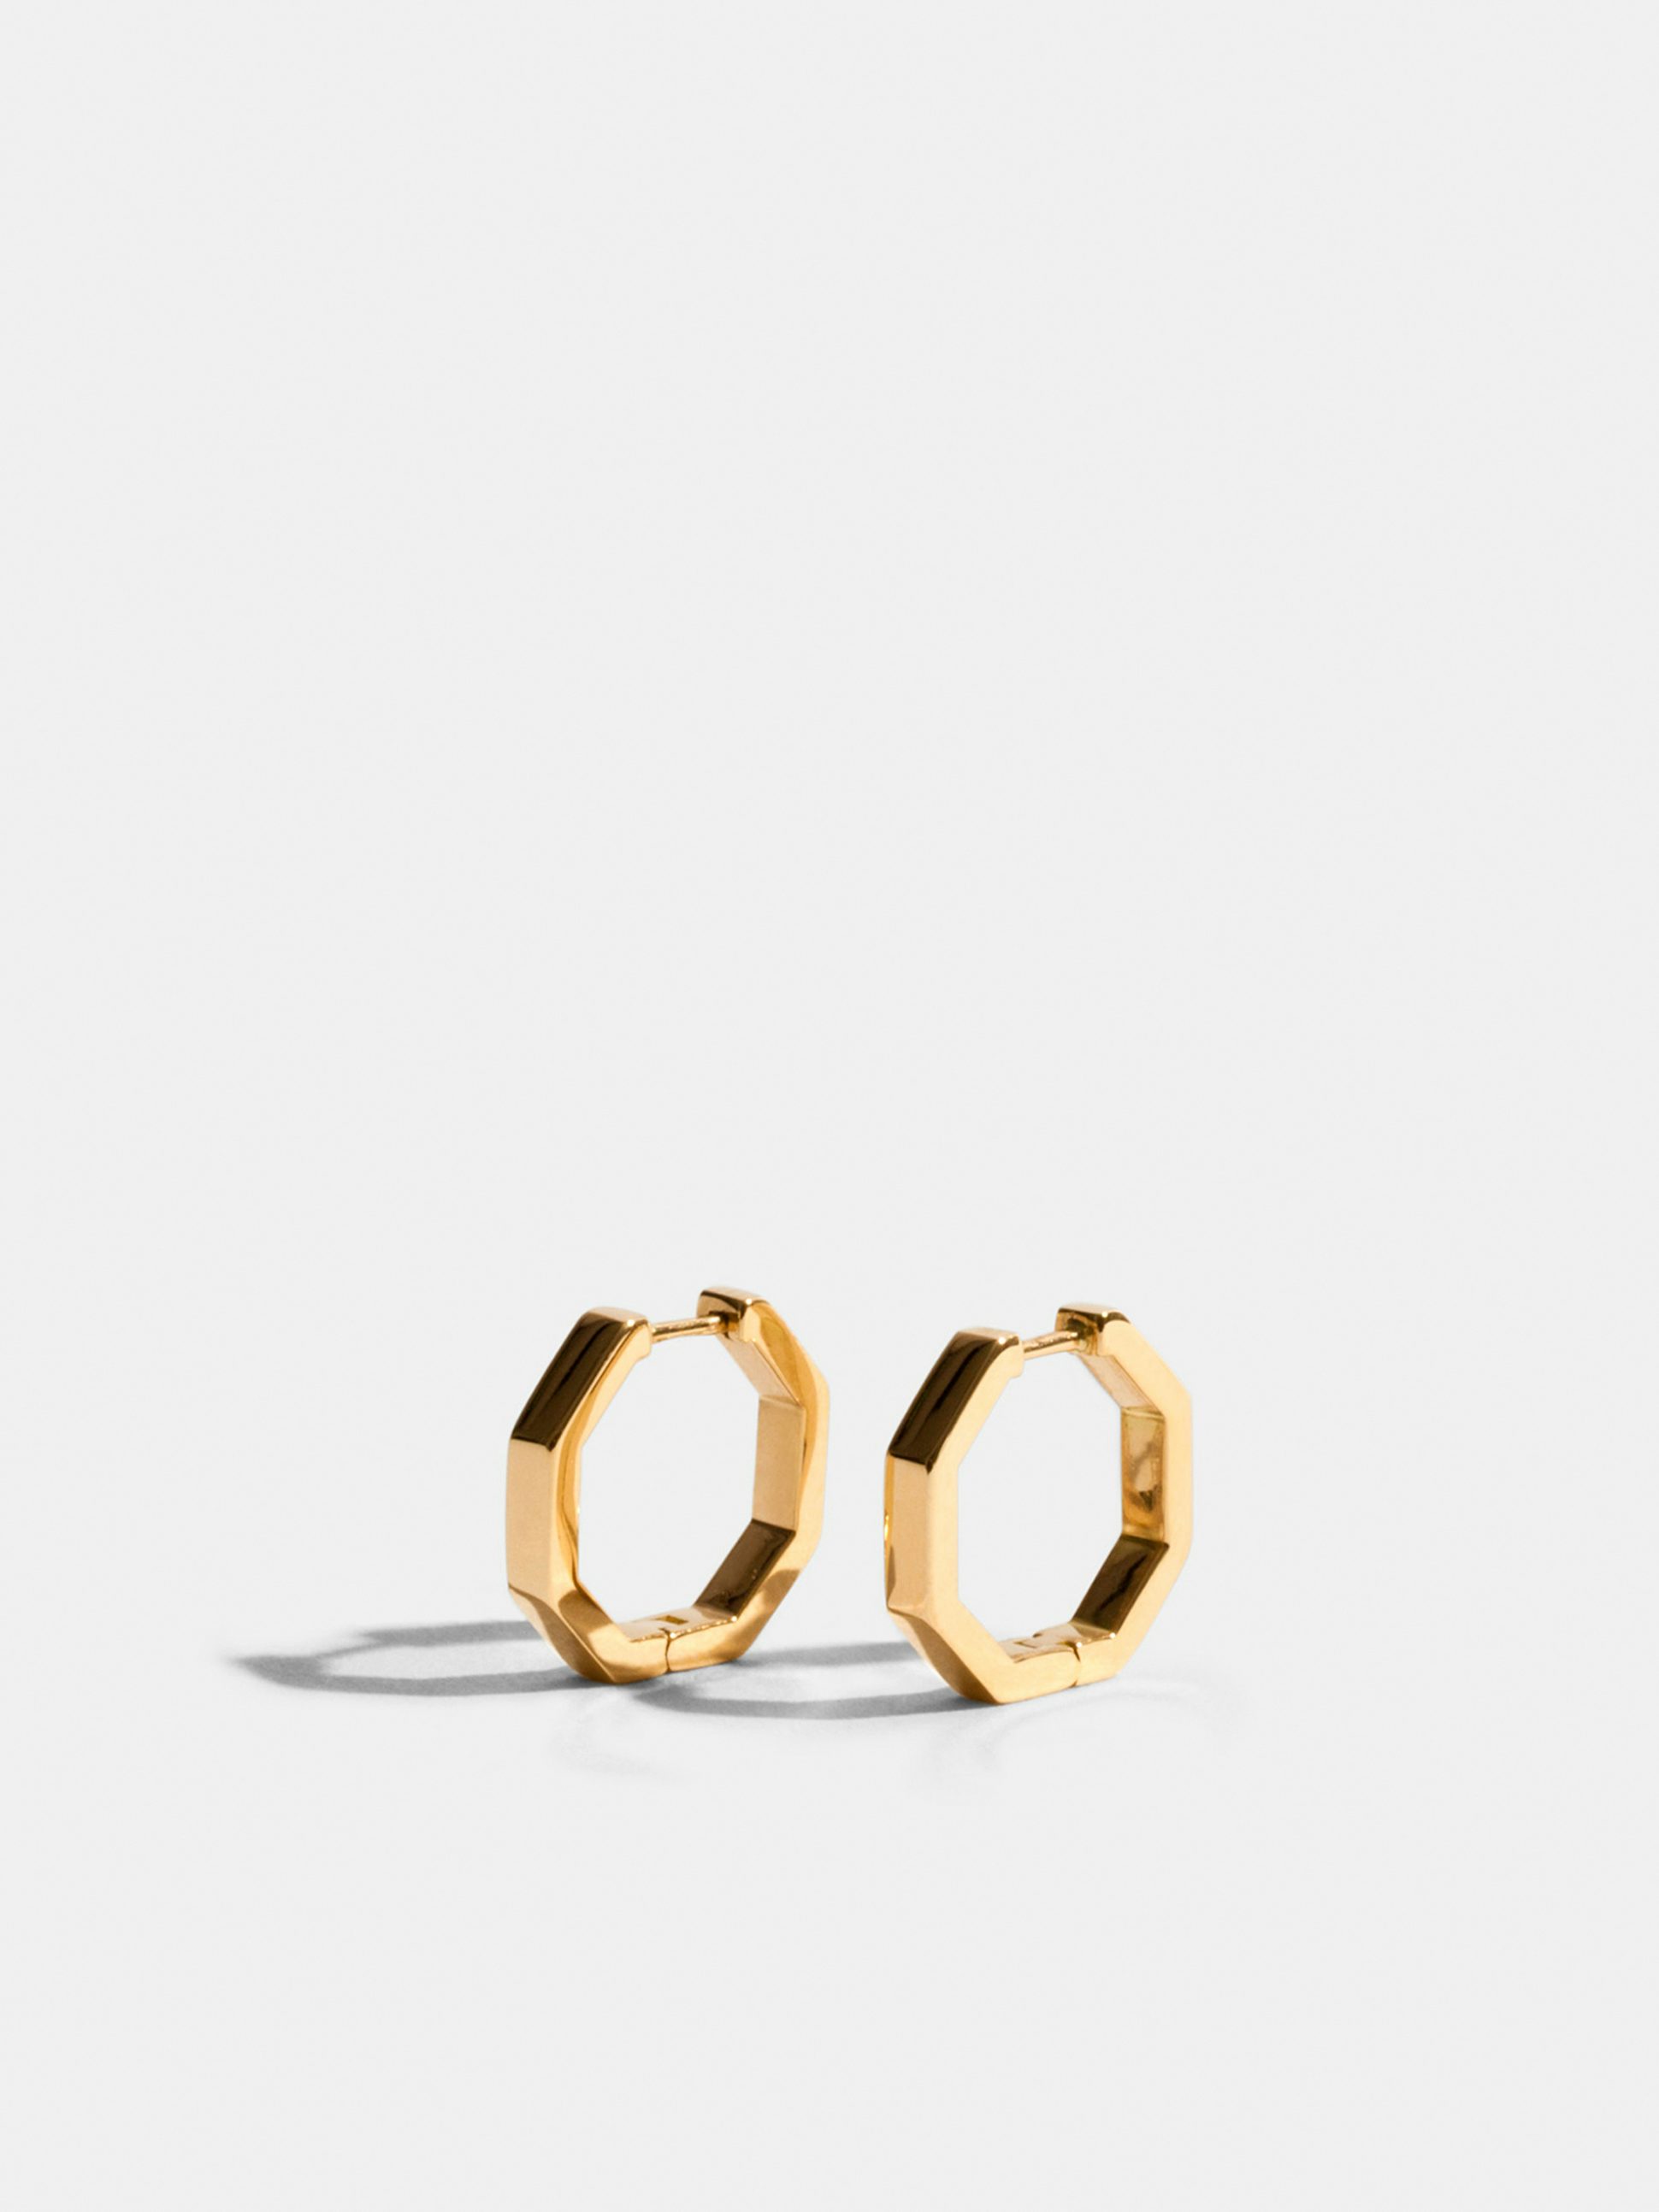 Octogone 13mm earrings in 18k Fairmined ethical yellow gold, the pair.